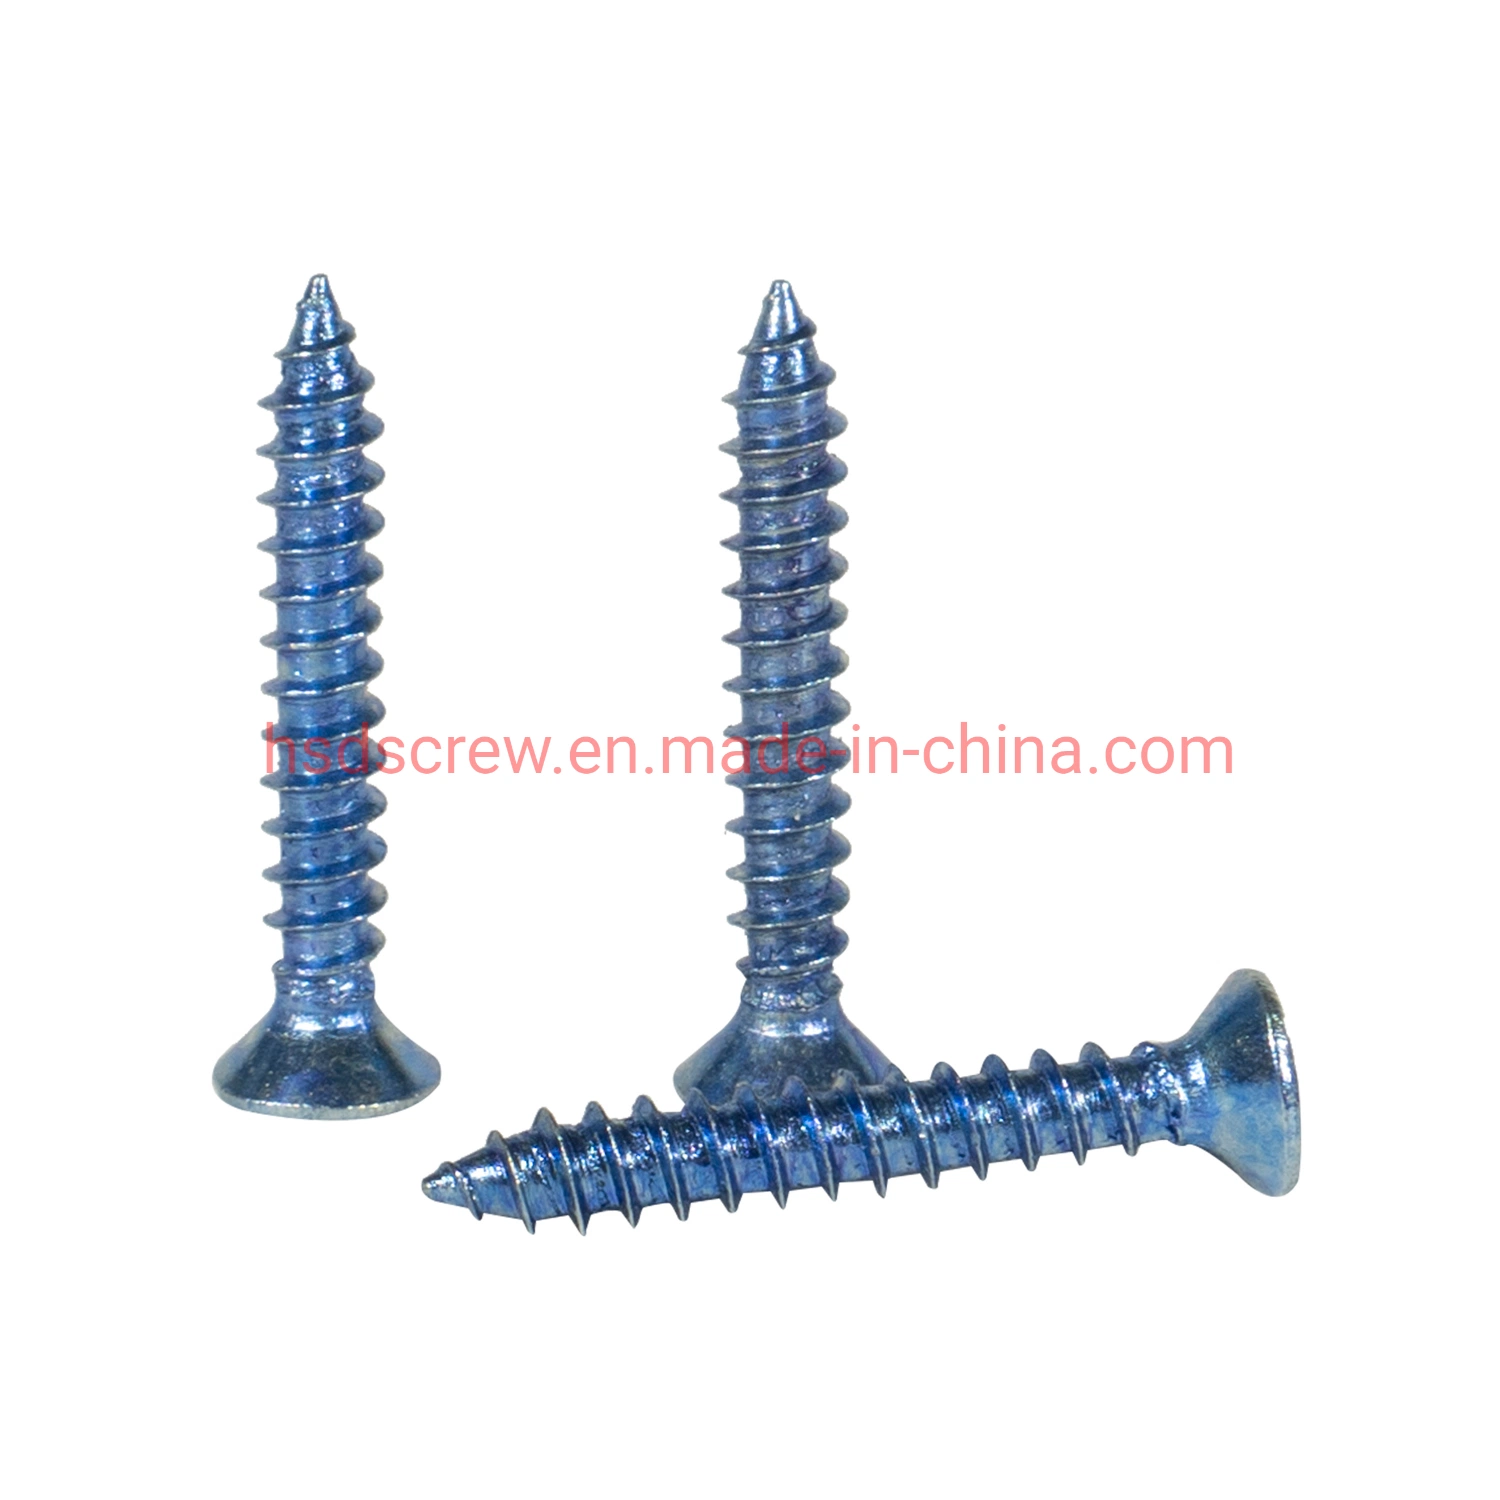 Made in China Hardware Fastener Screws Bolt China Wholesale/Supplier Tornillos Self Drilling Screw Clipboard Screw Carbon Steel Drywall Screw Self Tapping Screw